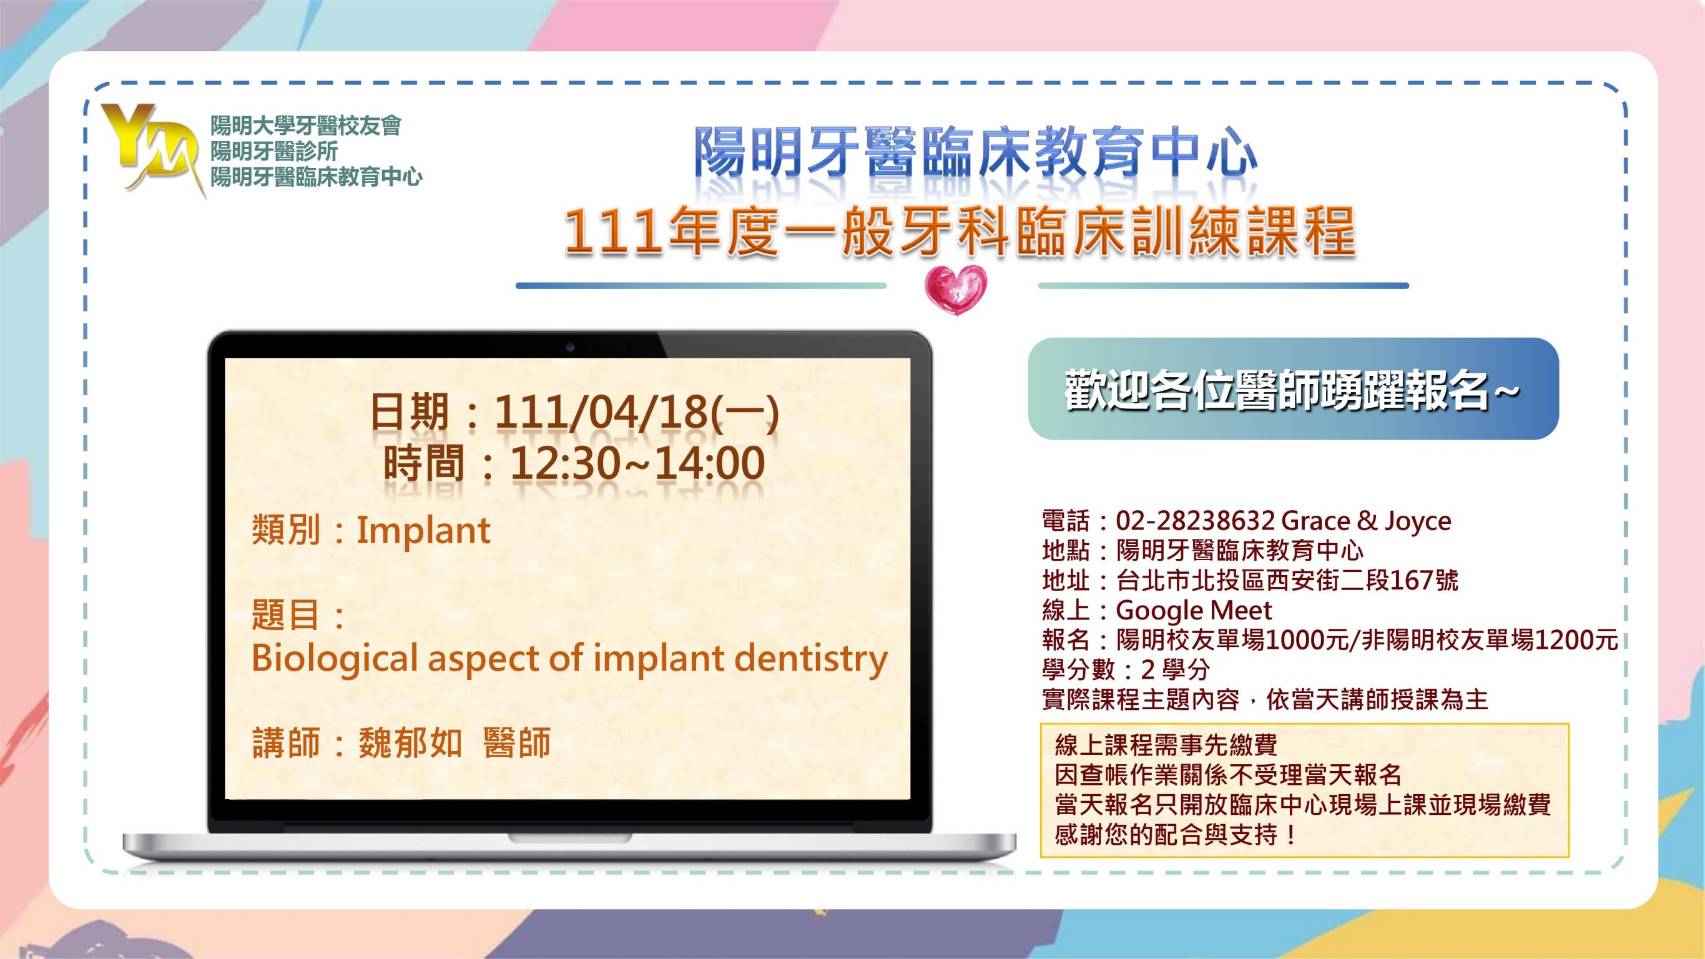 111/04/18 Biological aspect of implant dentistry